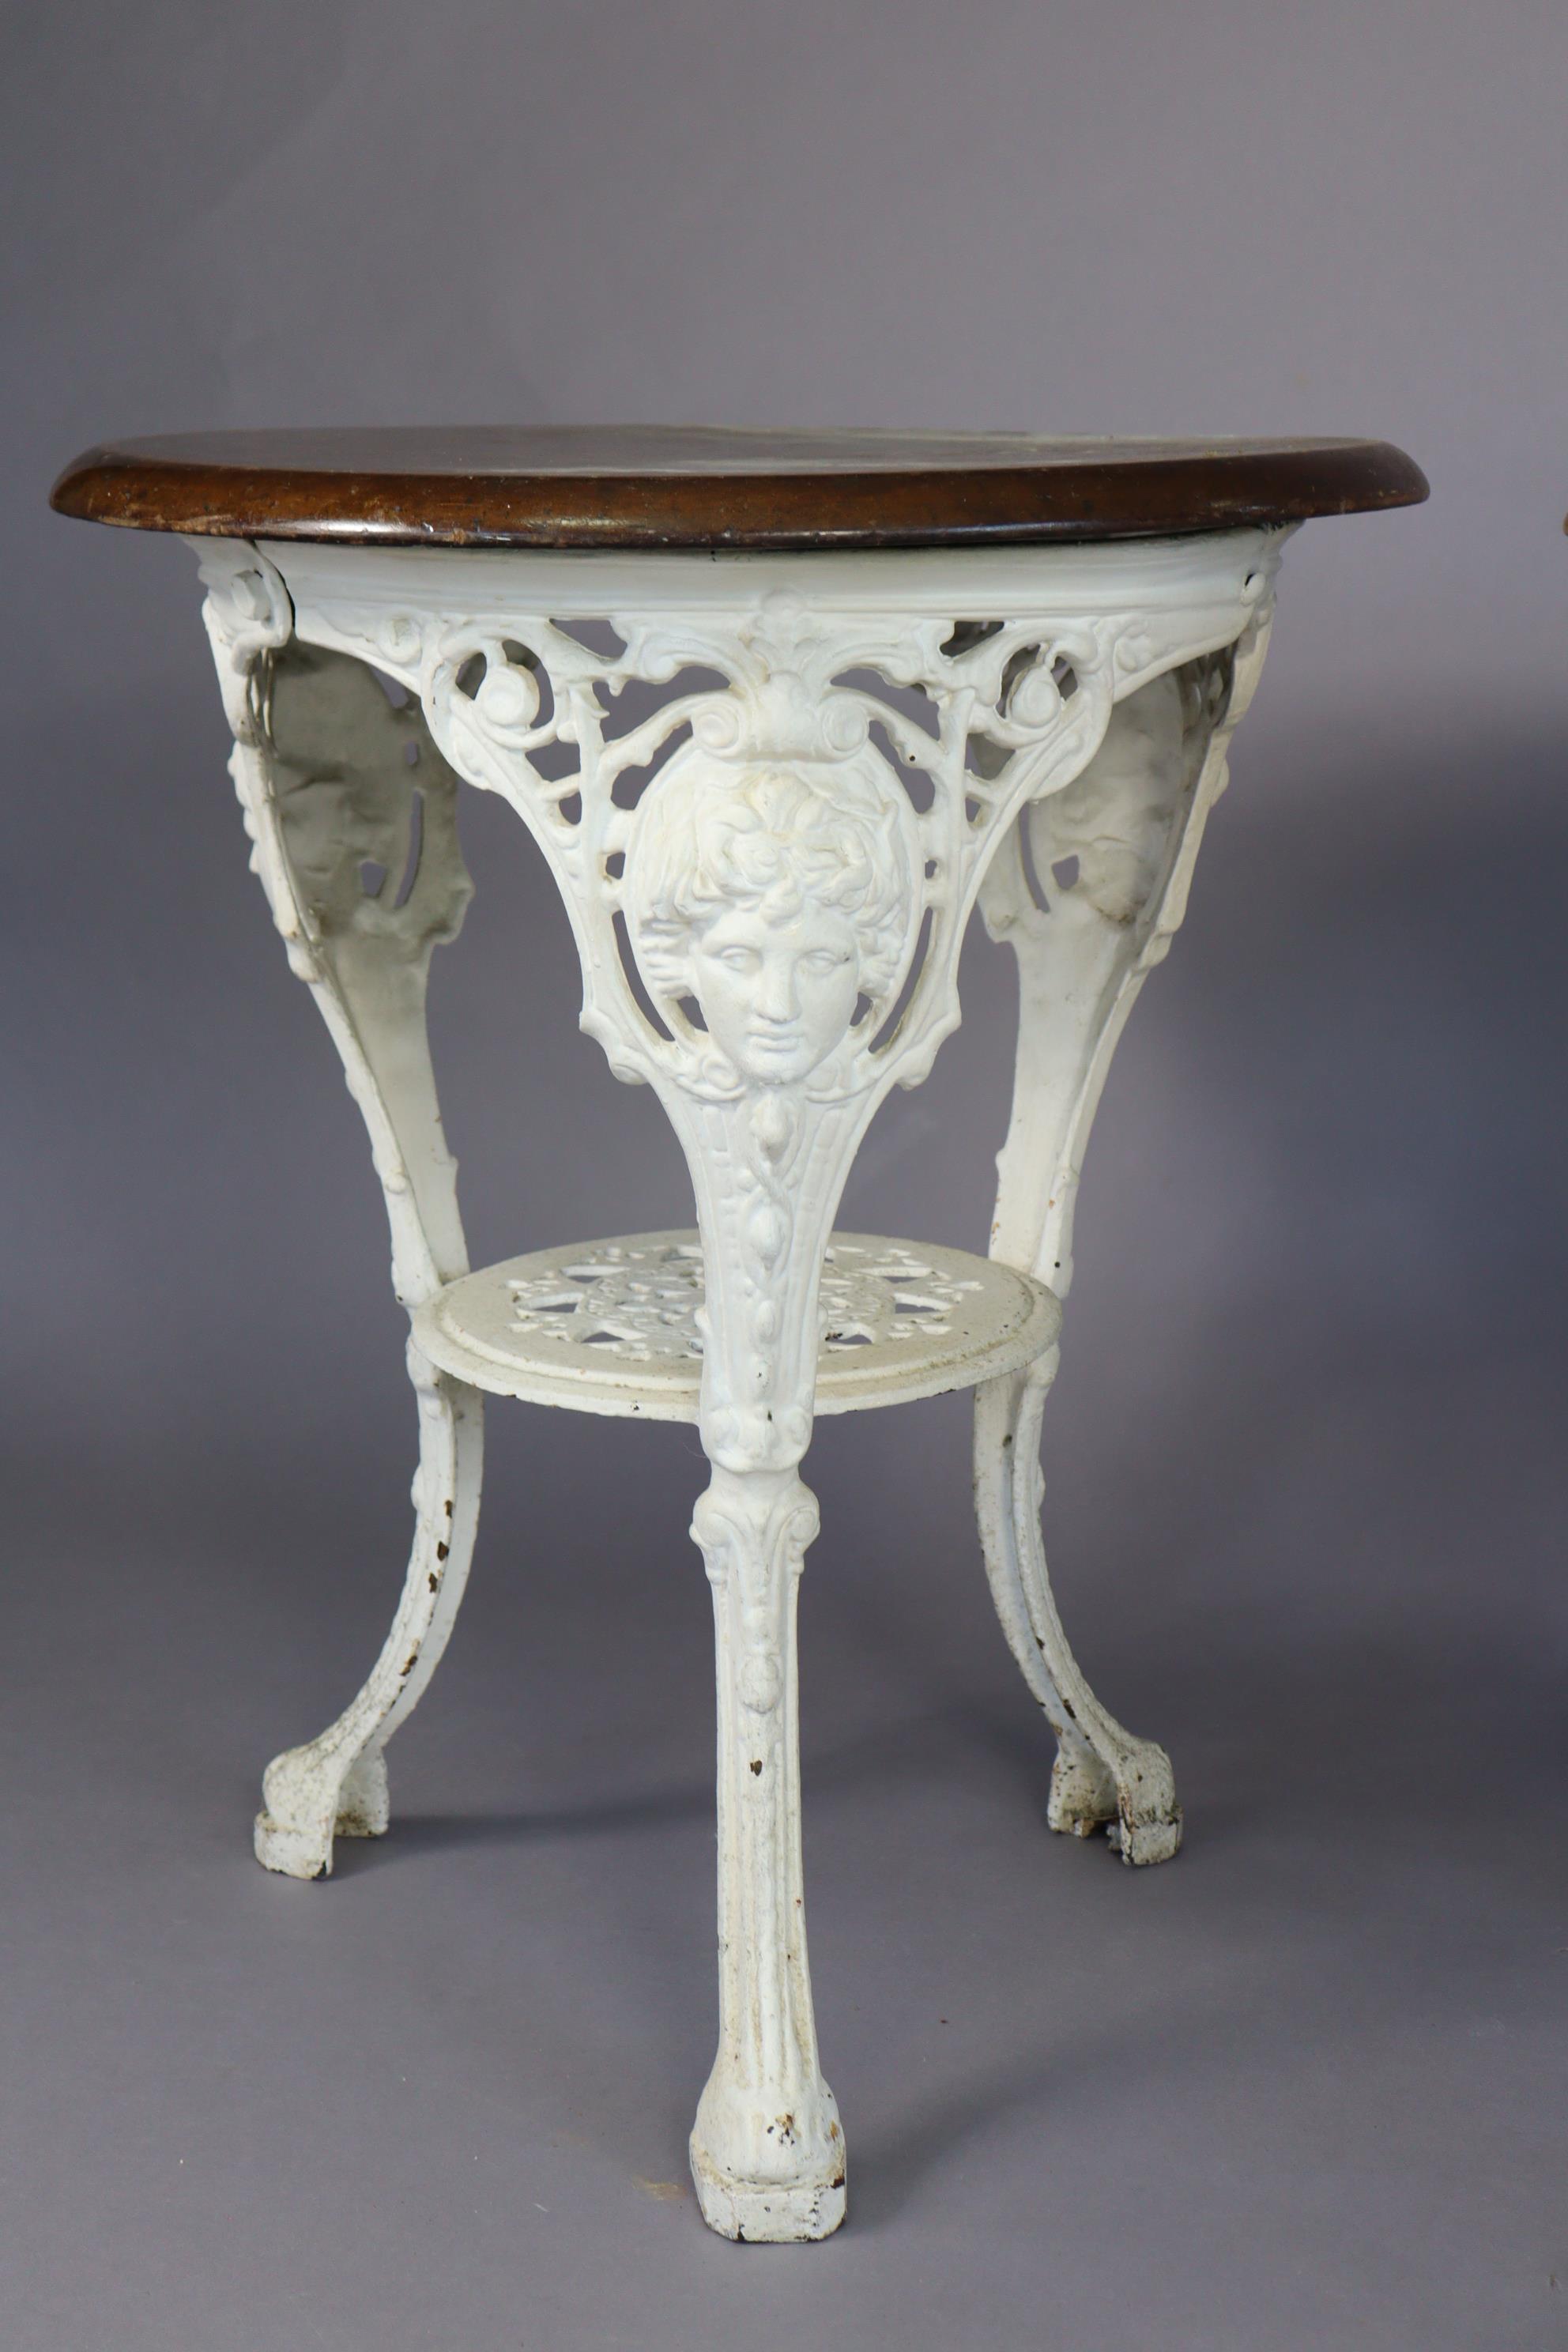 Two white painted cast-iron “Britannia” pub tables, each with a wooden top, 23½” diameter x 28” - Image 3 of 5